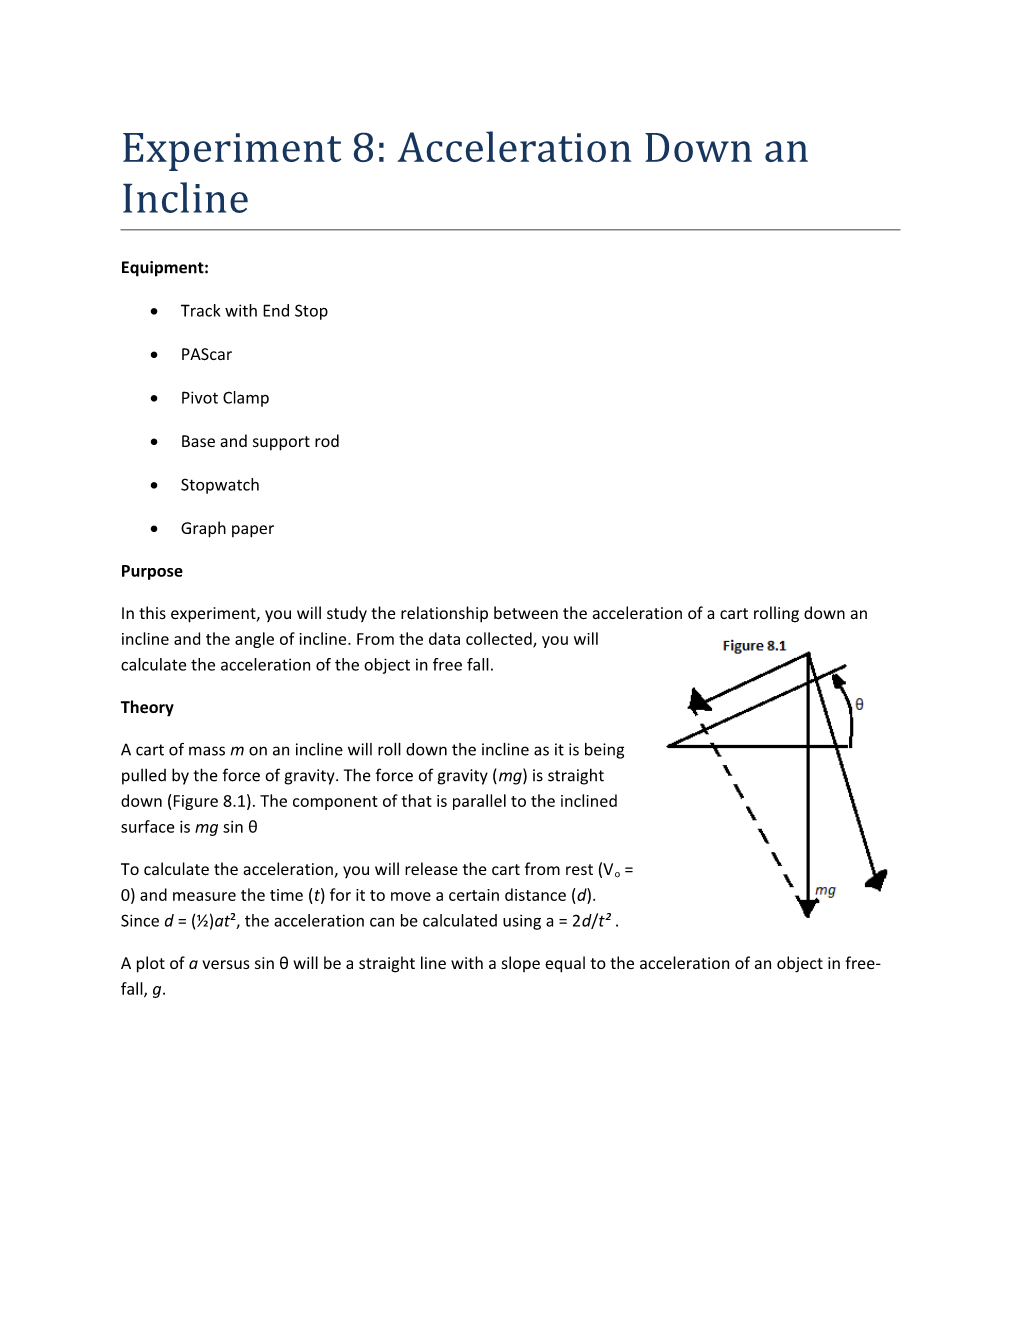 Experiment 8: Acceleration Down an Incline